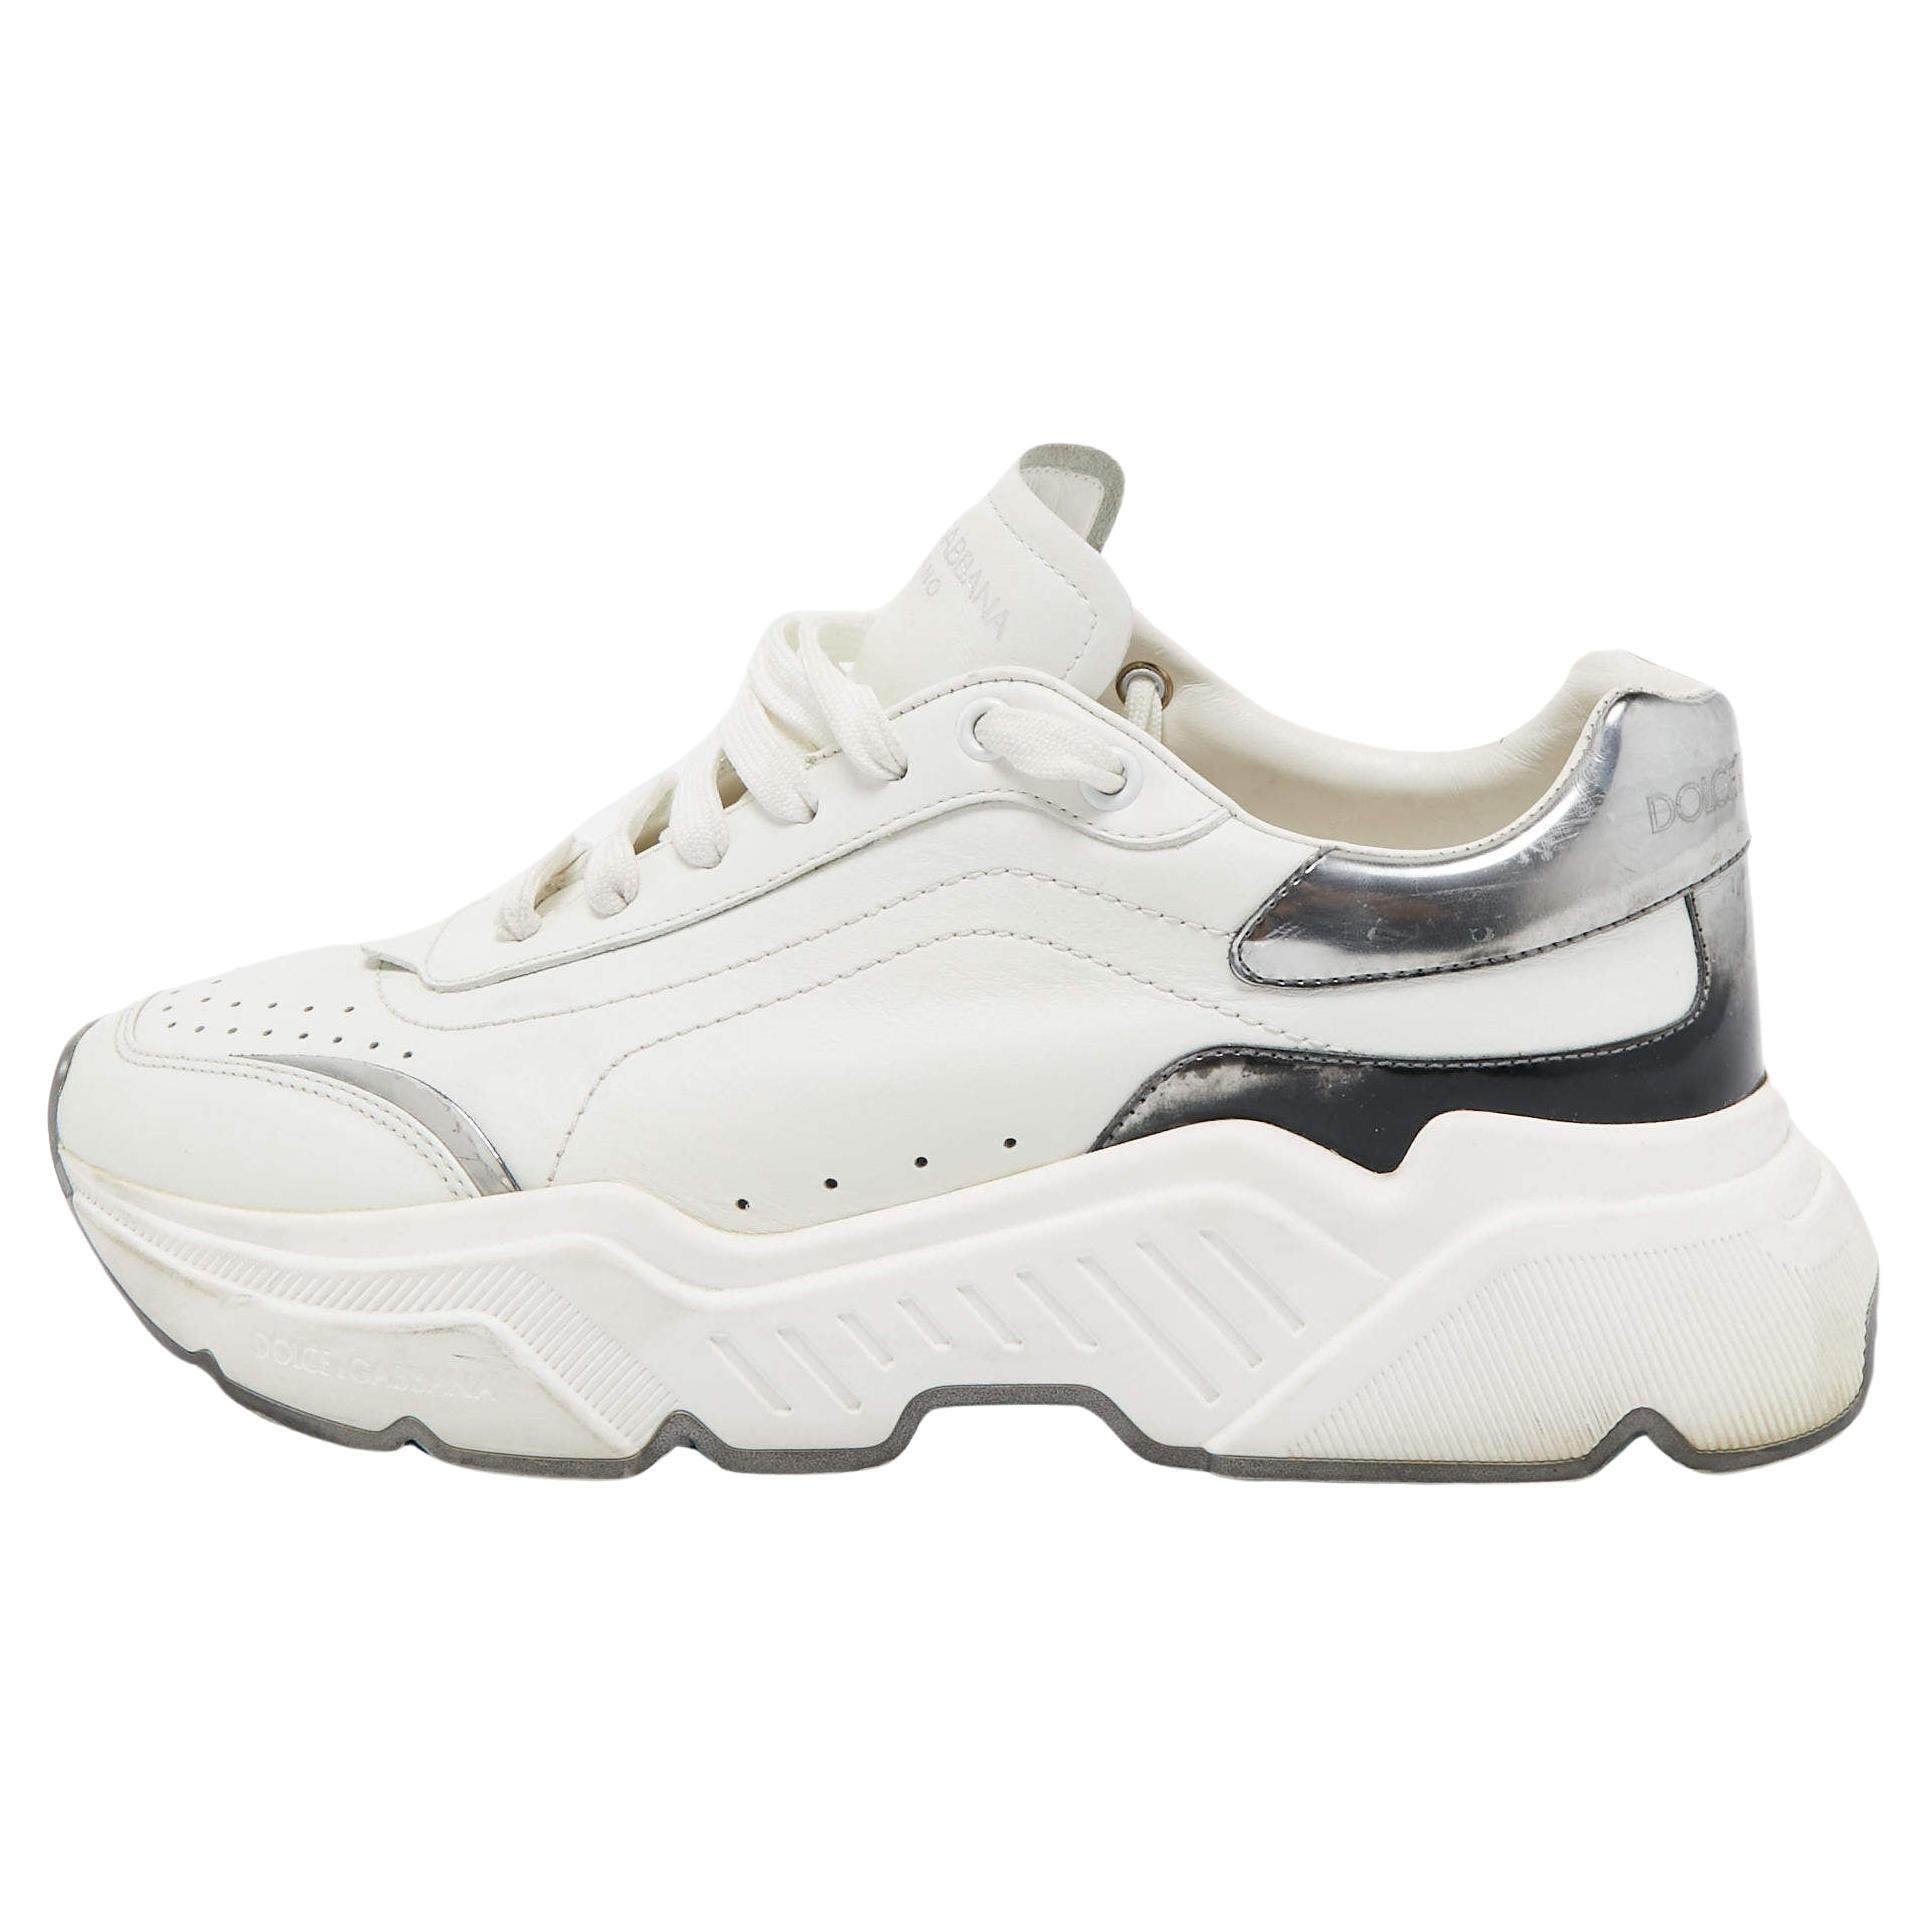 Dolce & Gabbana White/Silver Leather Daymaster Sneakers Size 41 For Sale